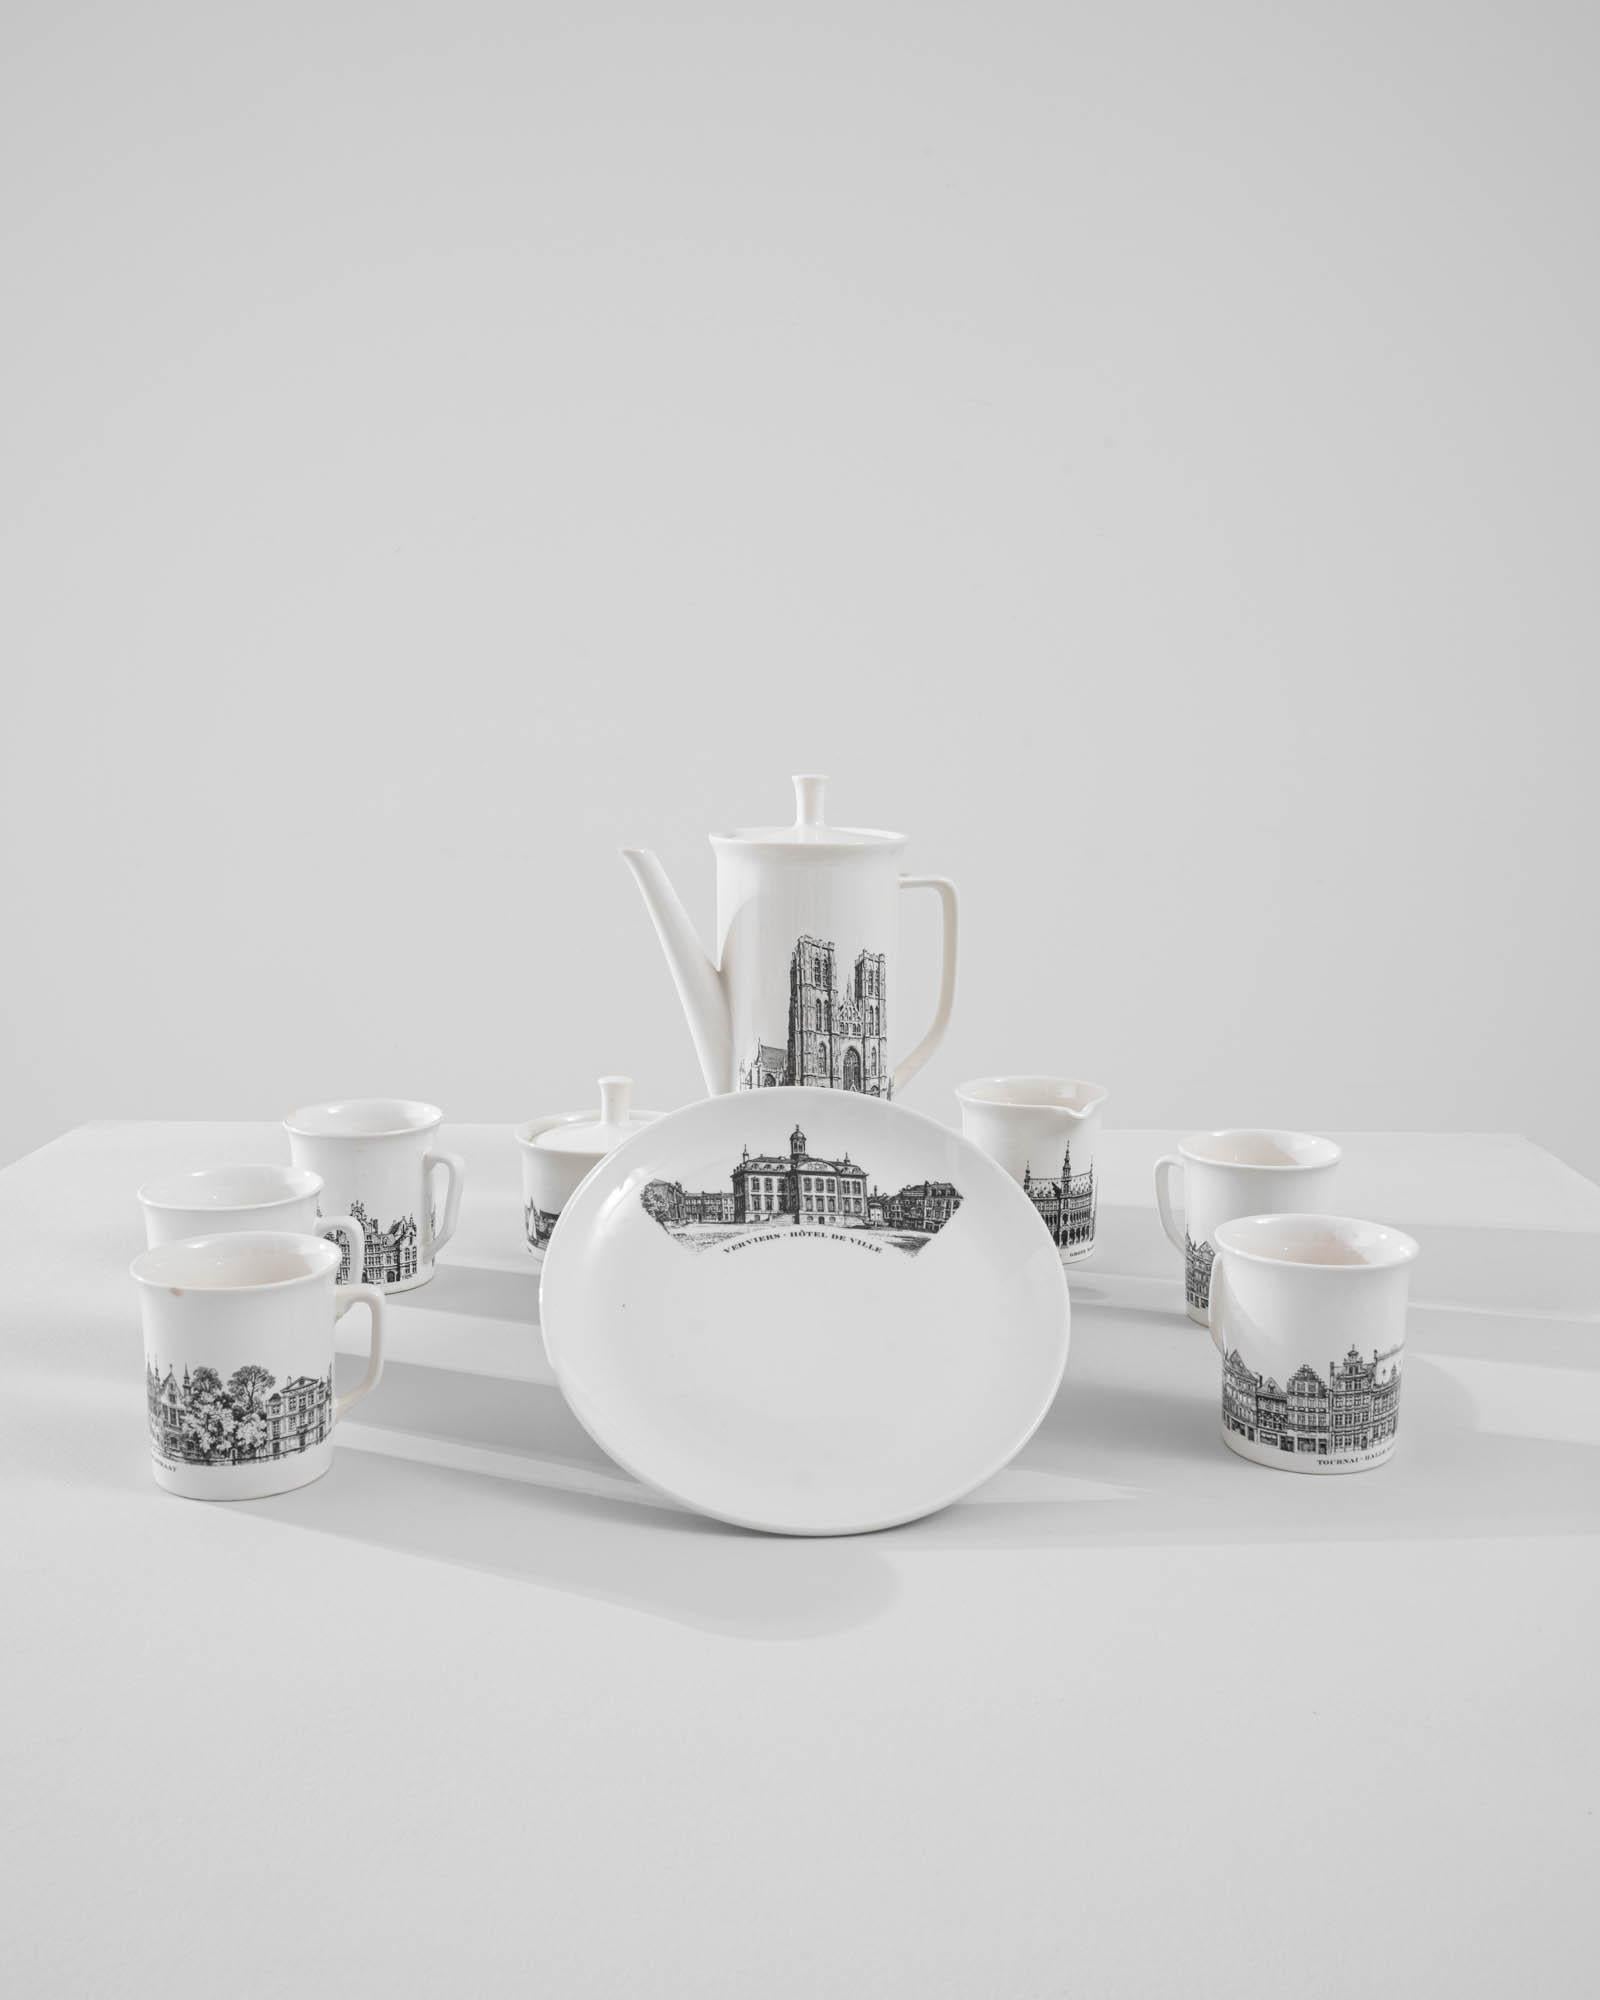 A ceramic coffee set created in 20th century Belgium. This satisfying understated coffee set charms the eye with neatly composed porcelain, delicately minimal forms, and carefully inscribed architectural sights. Each mug is illustrated with a